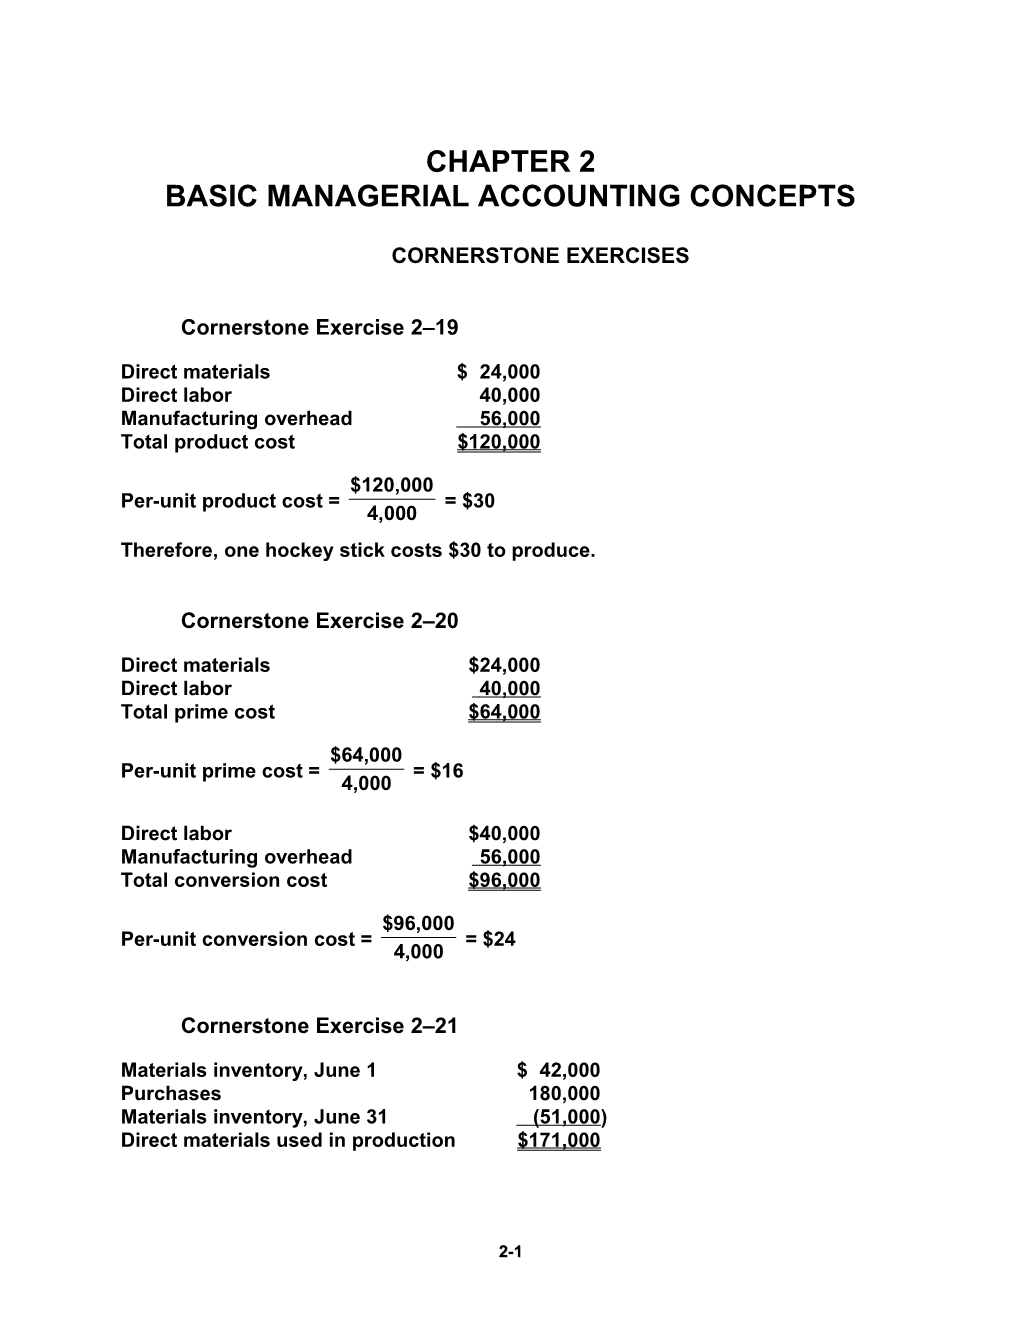 Basic Managerial Accounting Concepts